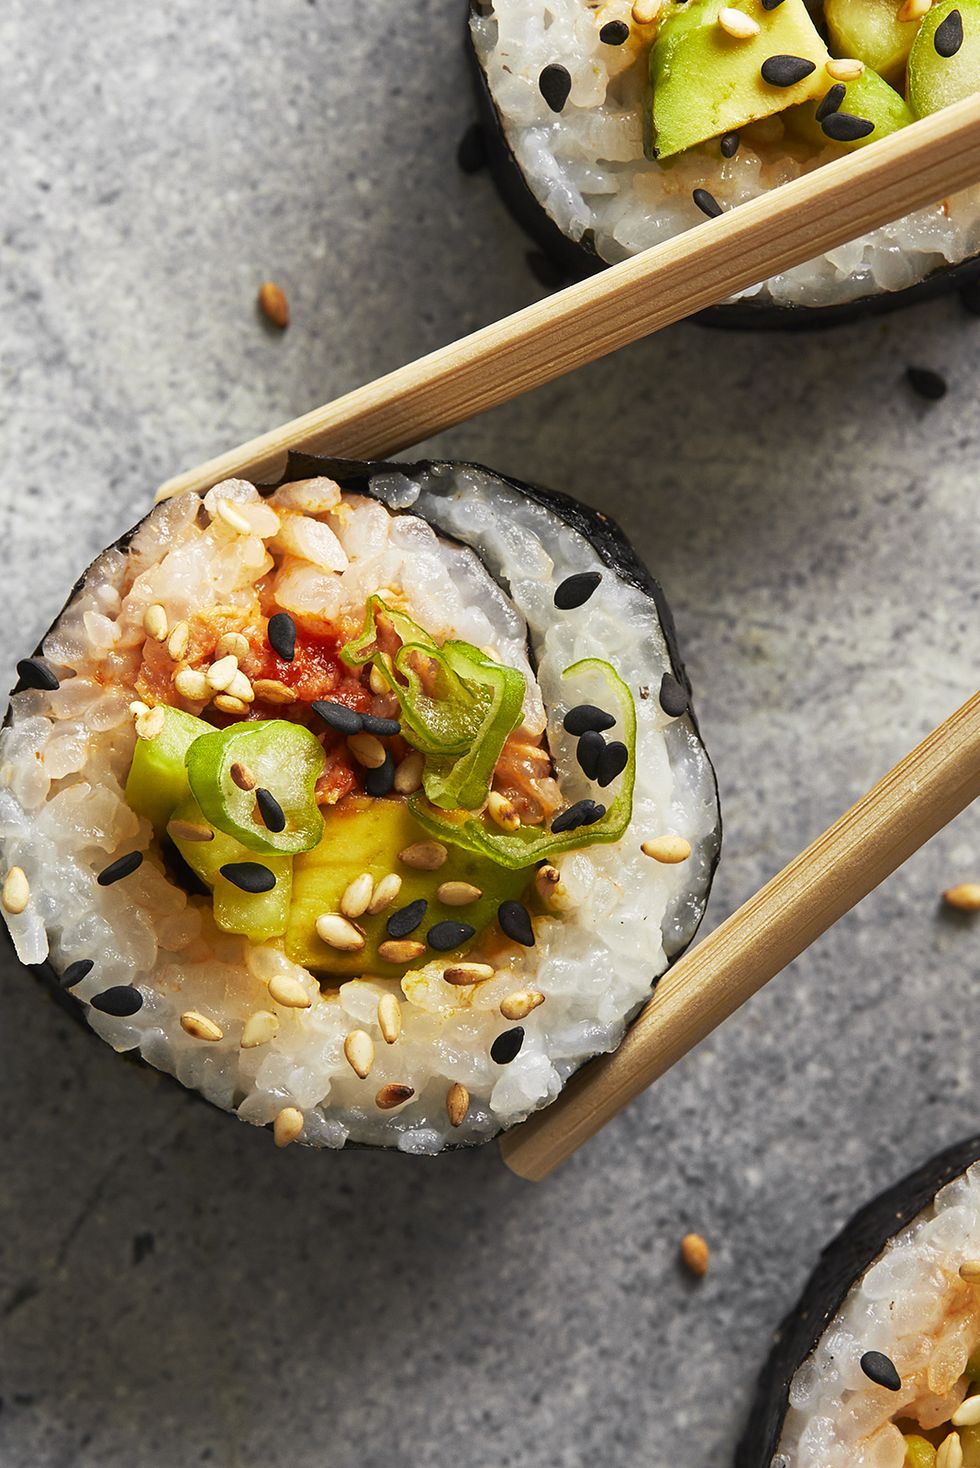 5 Sushi Gadgets - to help you make sushi rolls in seconds 😊 